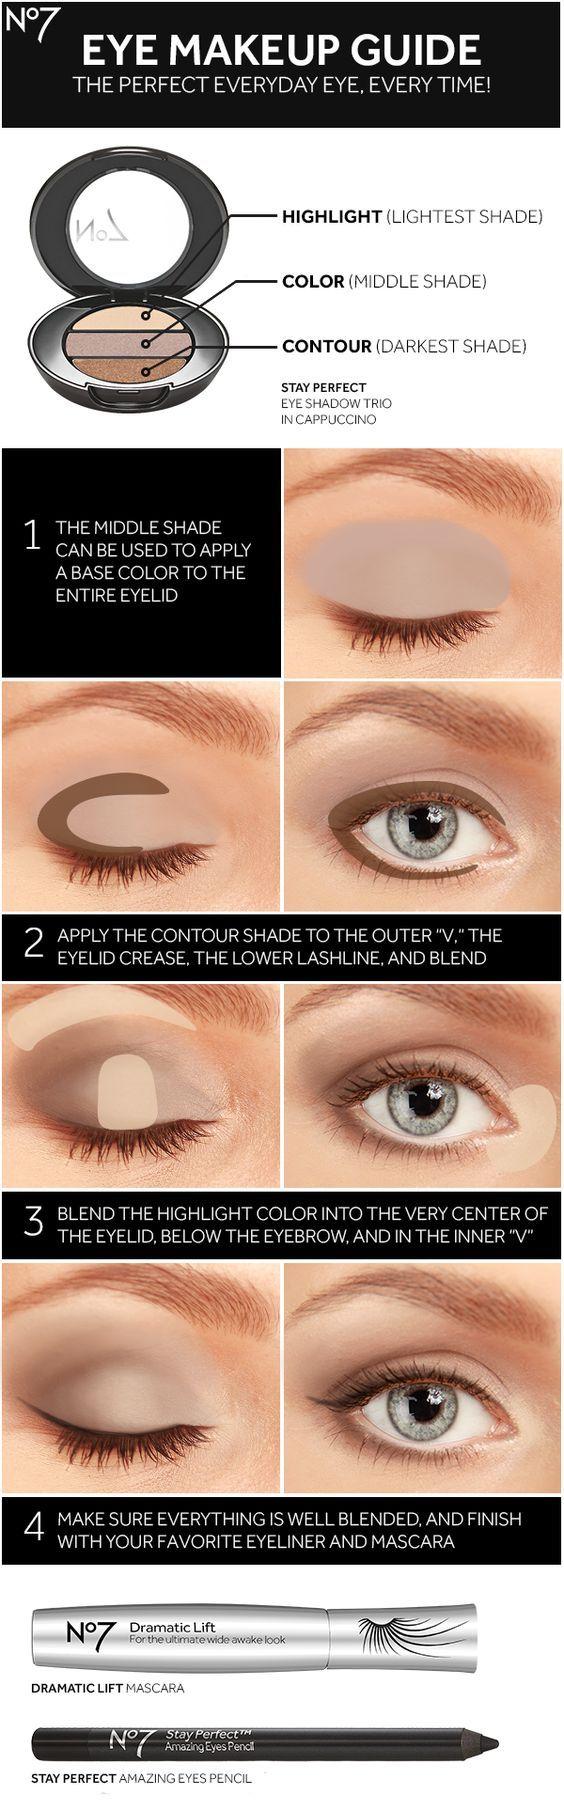 Hochzeit - 10 Common Makeup Mistakes And How To Fix Them